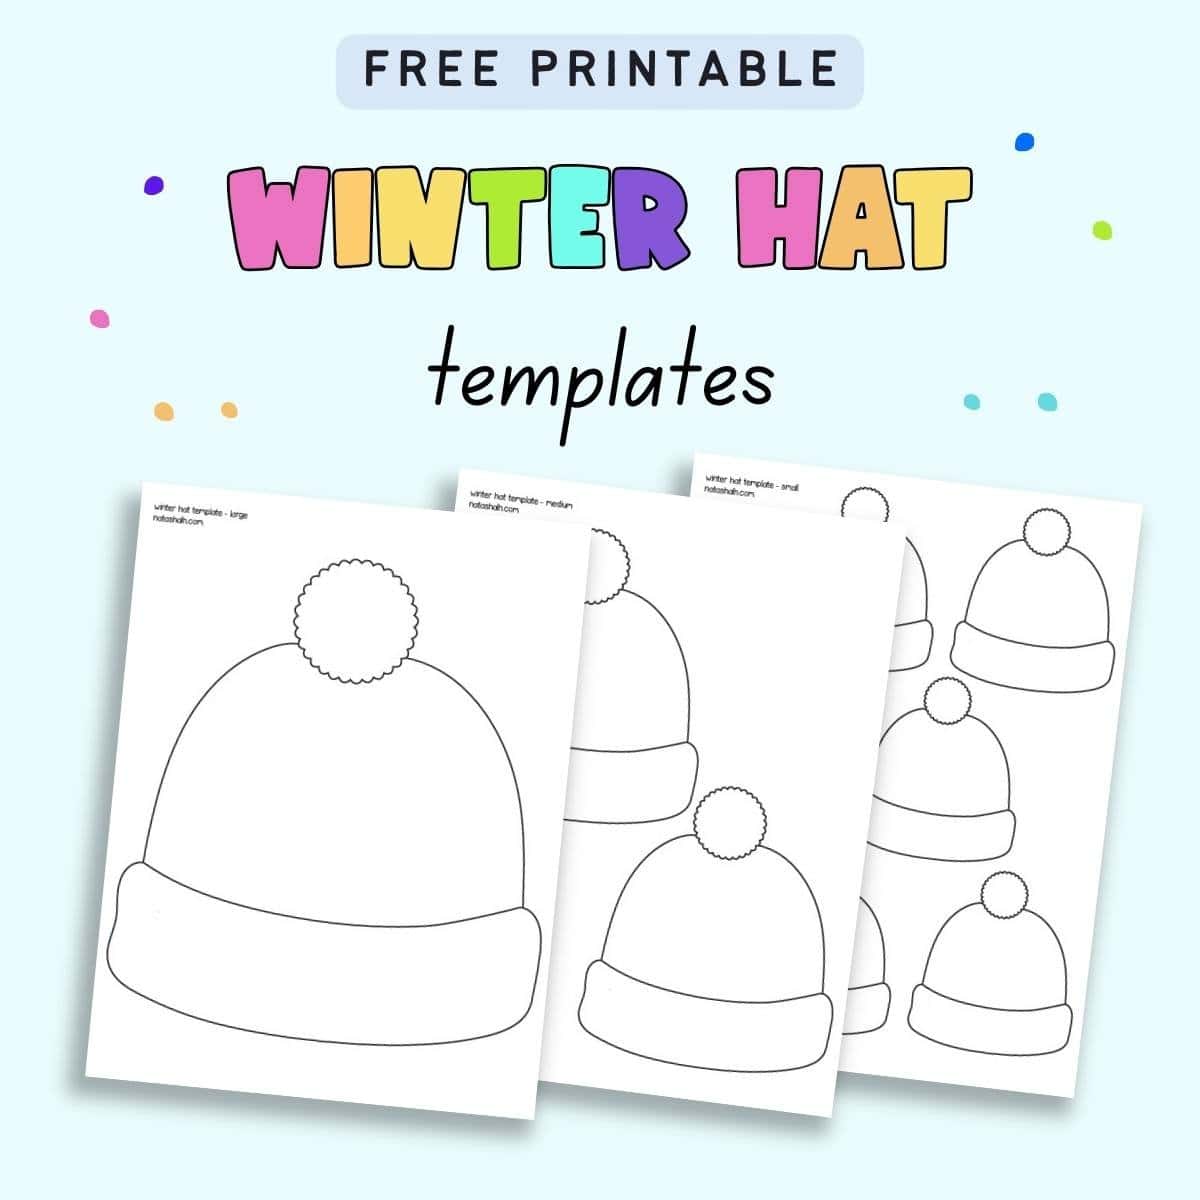 text "free printable winter hat templates" with a preview of there pages of winter hat template